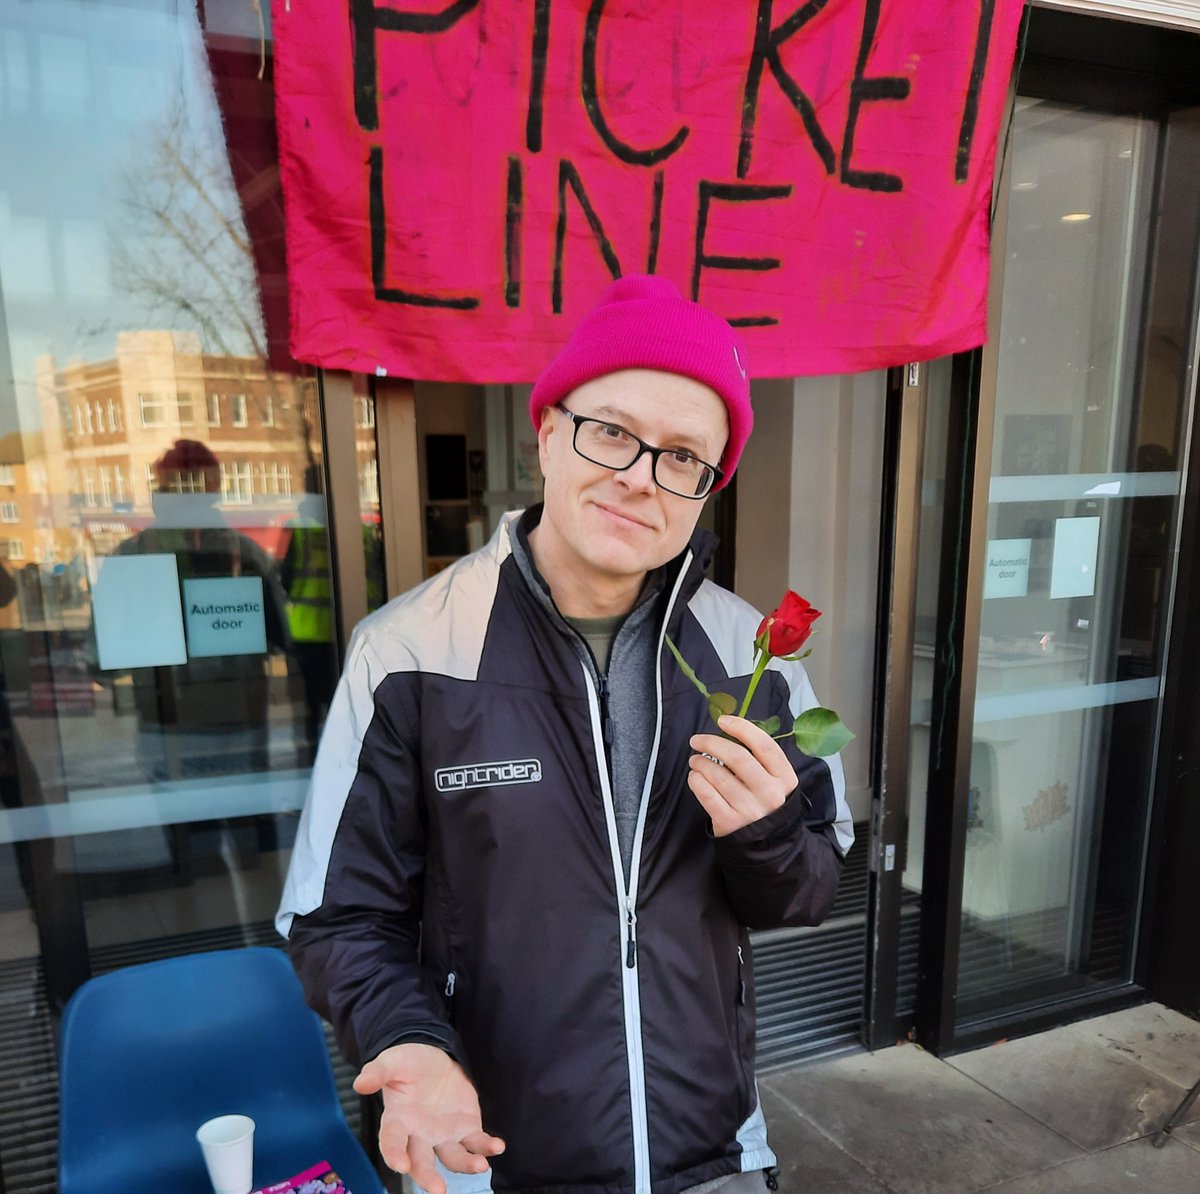 On valentines day, this rose goes to all the strikers out there xx #ussmess #ucuRISING #UCUstrike @oubucu @GoldsmithsUCU Chocolates are nice, but fair pensions are even better x